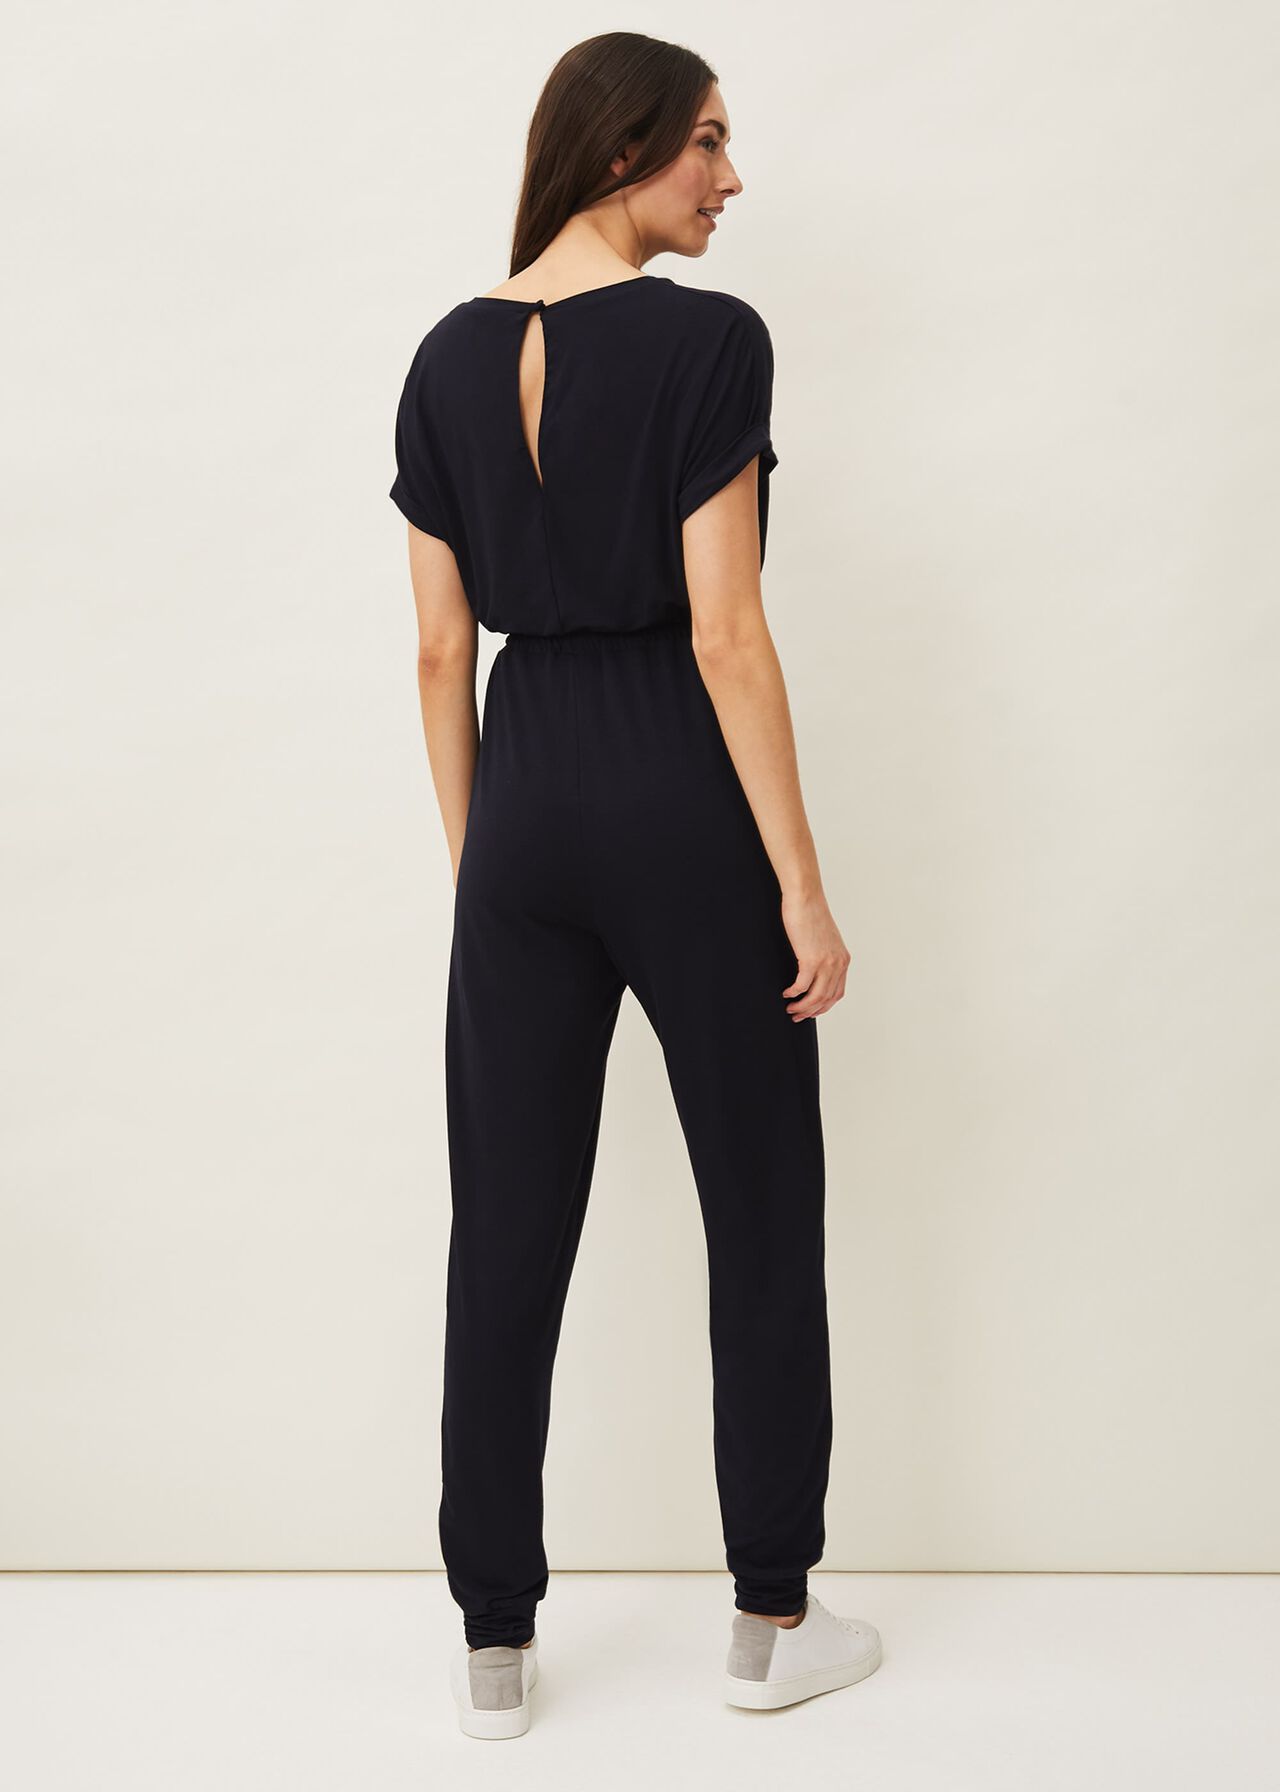 Perrie Soft Jersey Jumpsuit